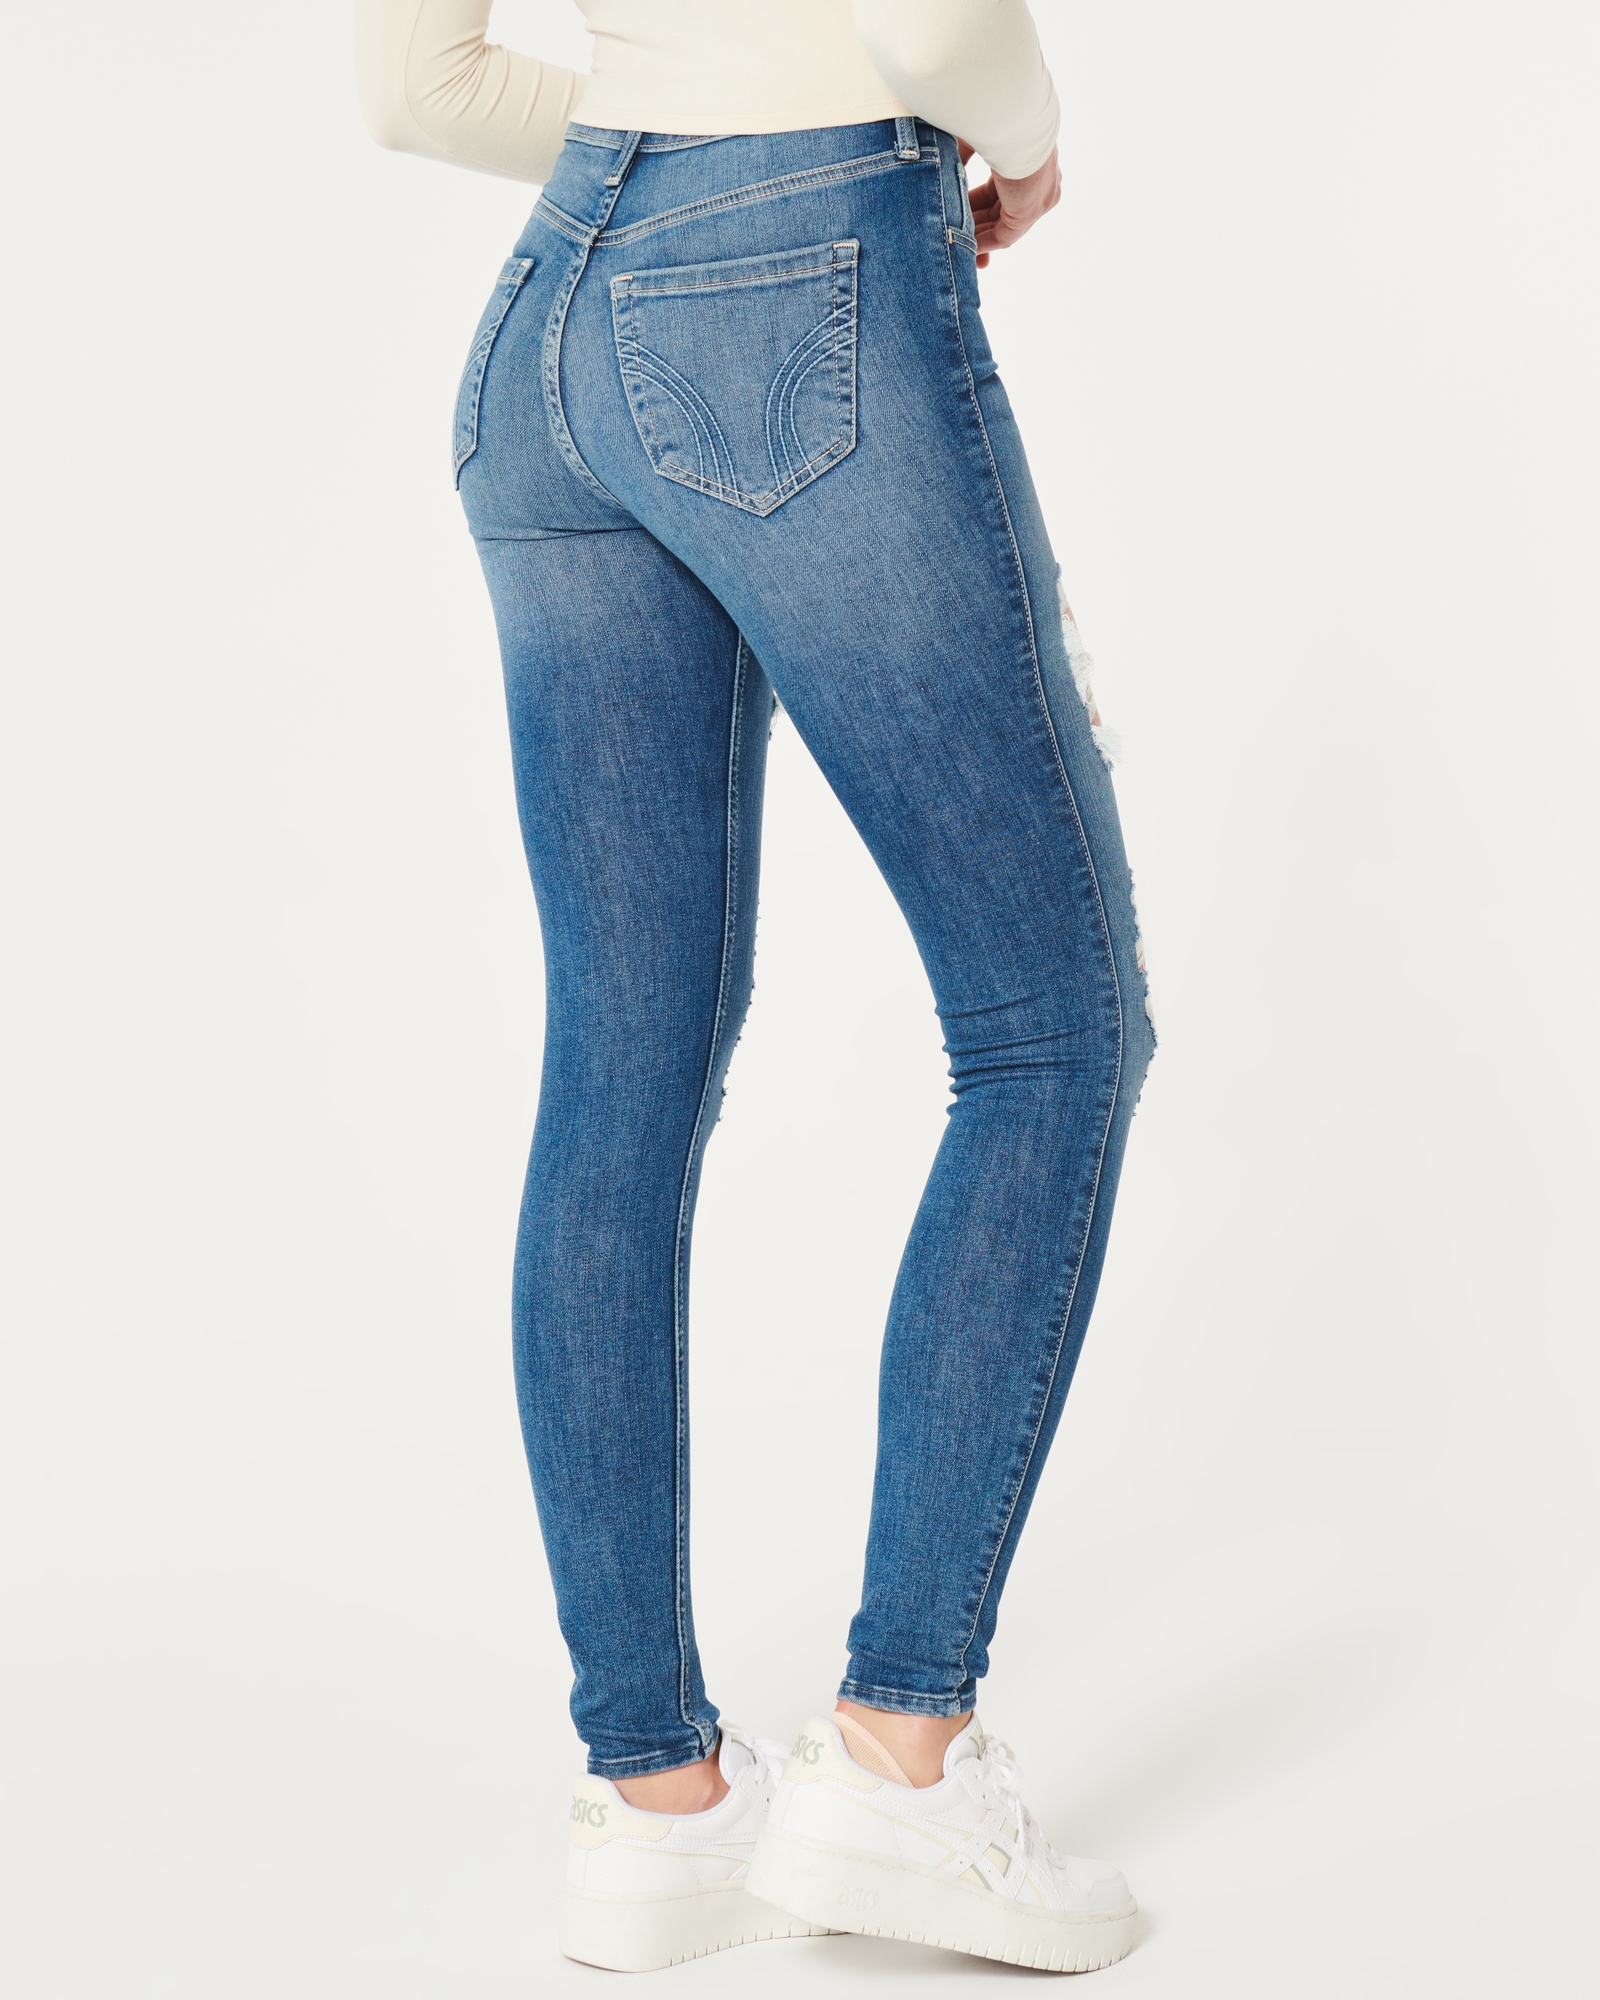 Hollister Stretch Super Skinny High-Rise Jeans Blue Size 00 - $25 (50% Off  Retail) New With Tags - From Dian